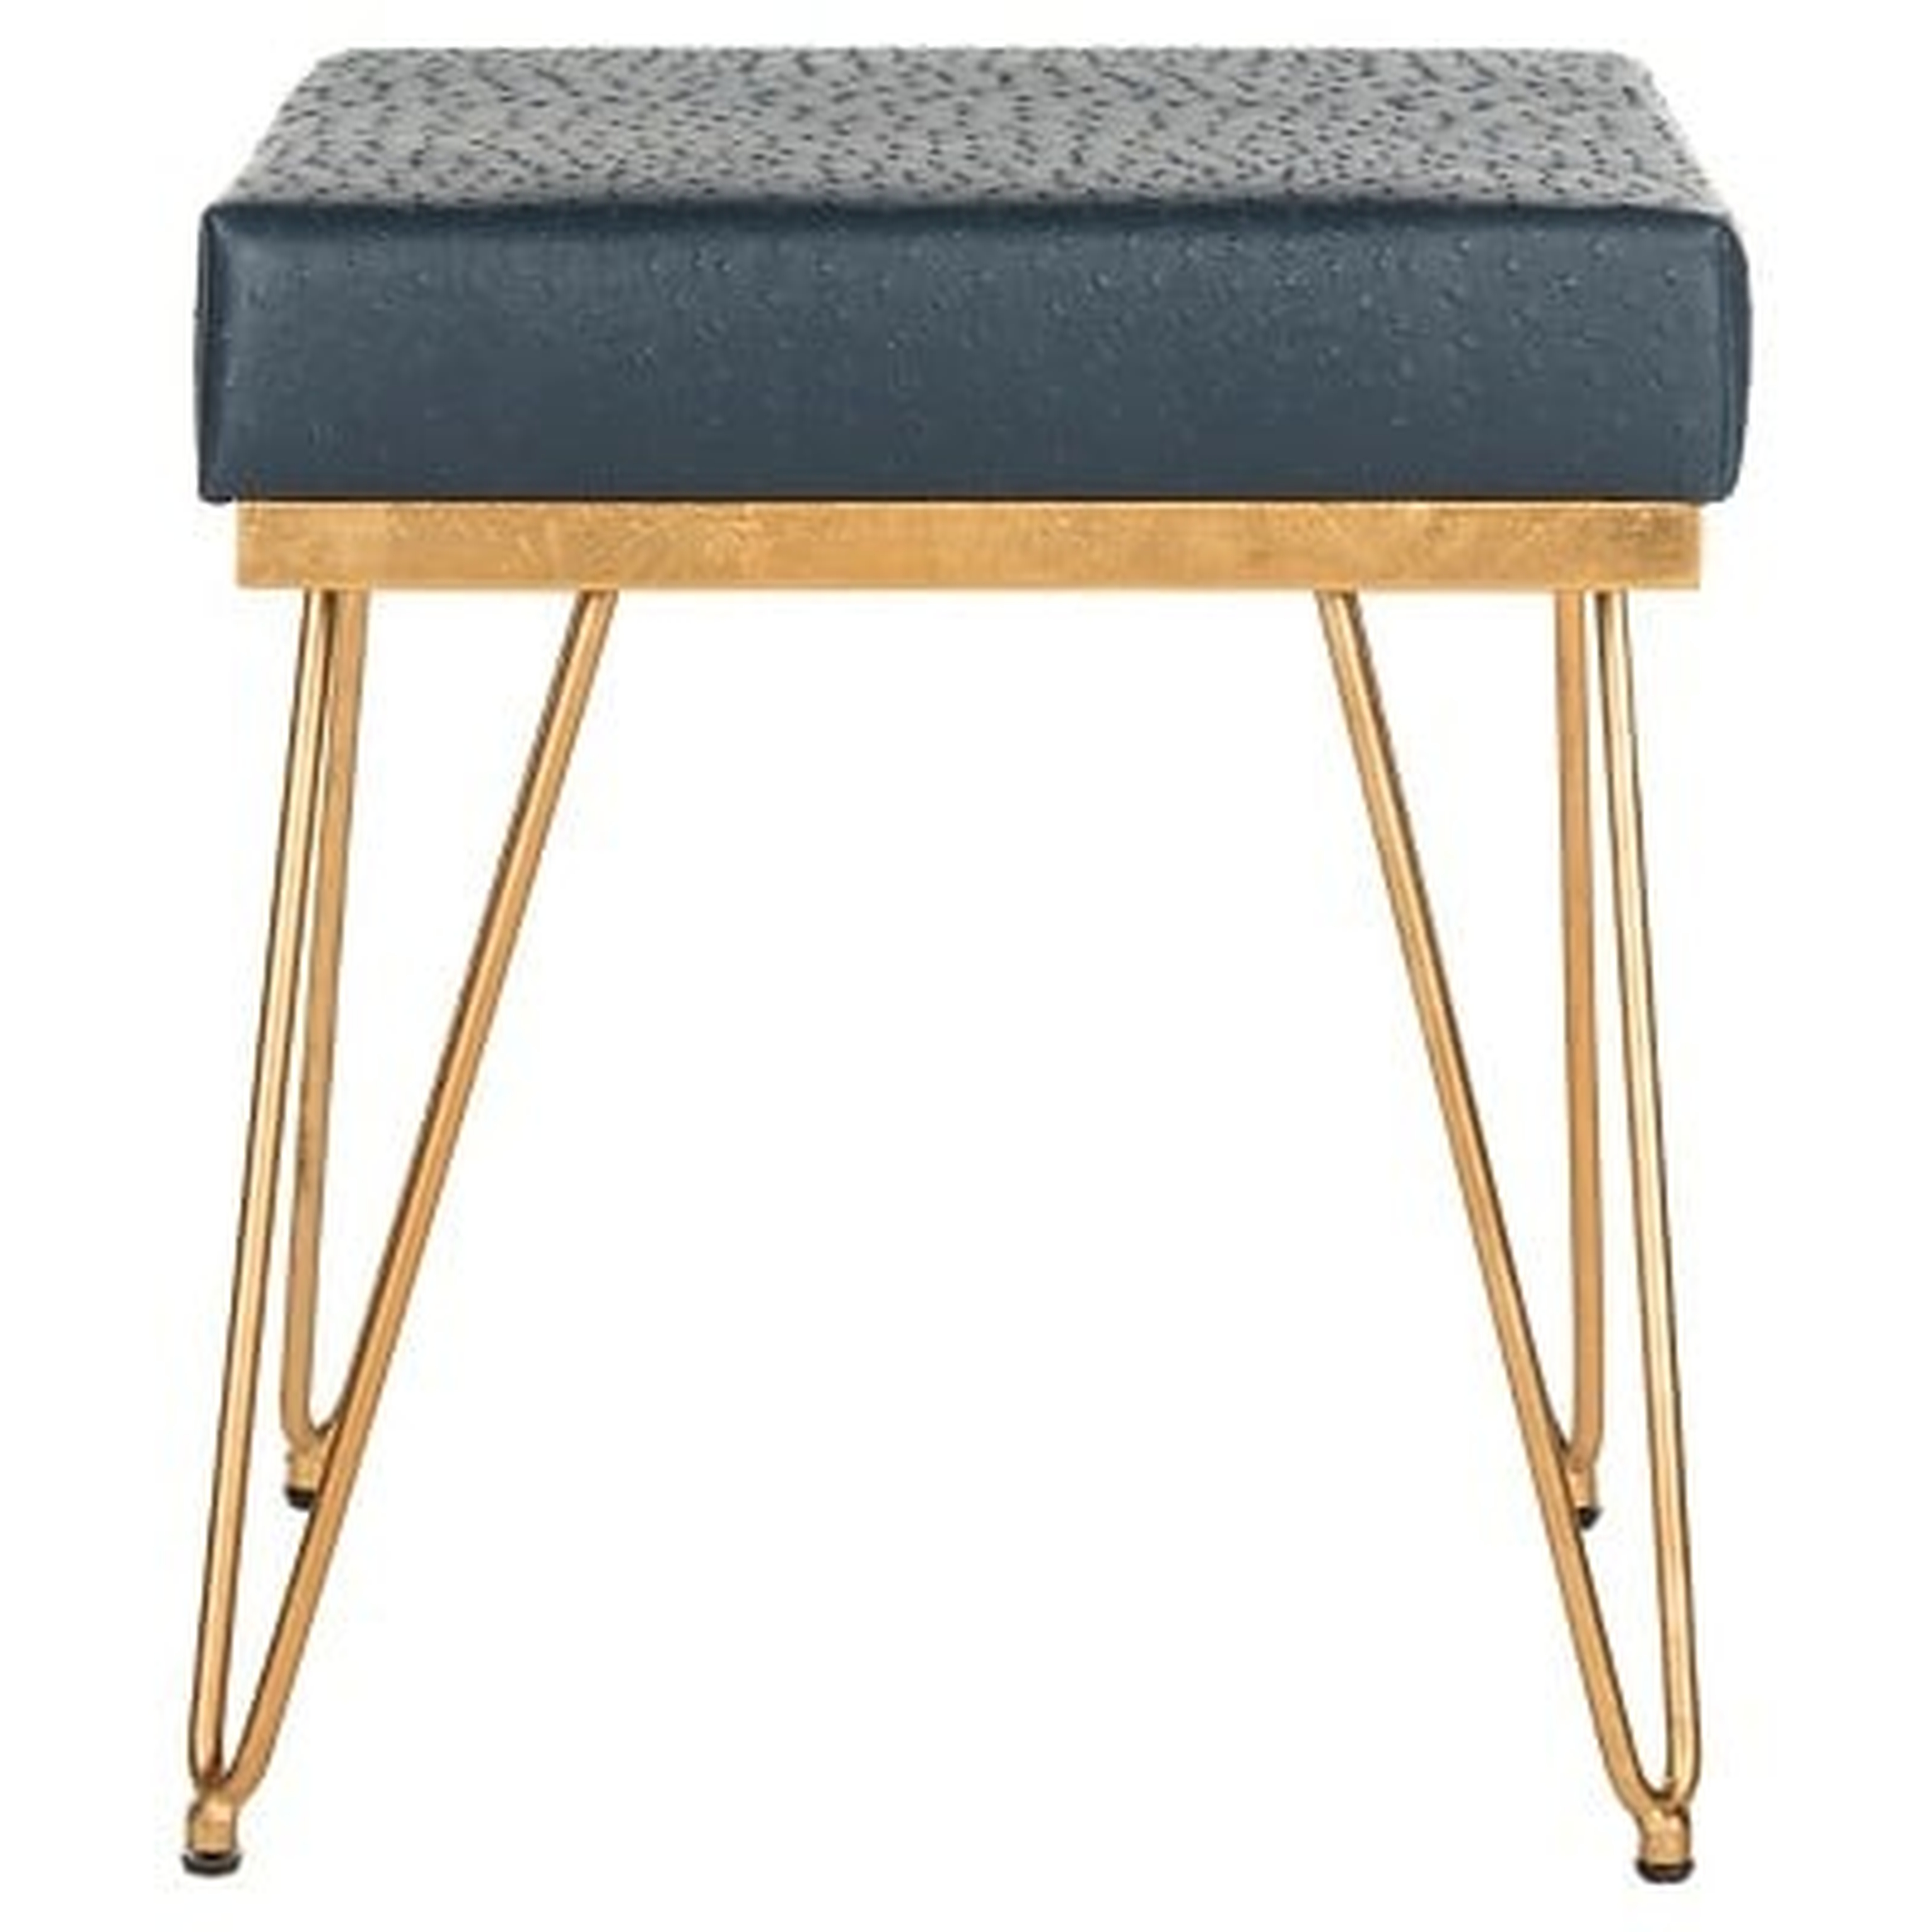 Jenine Faux Ostrich Square Bench - Navy - Arlo Home - Arlo Home